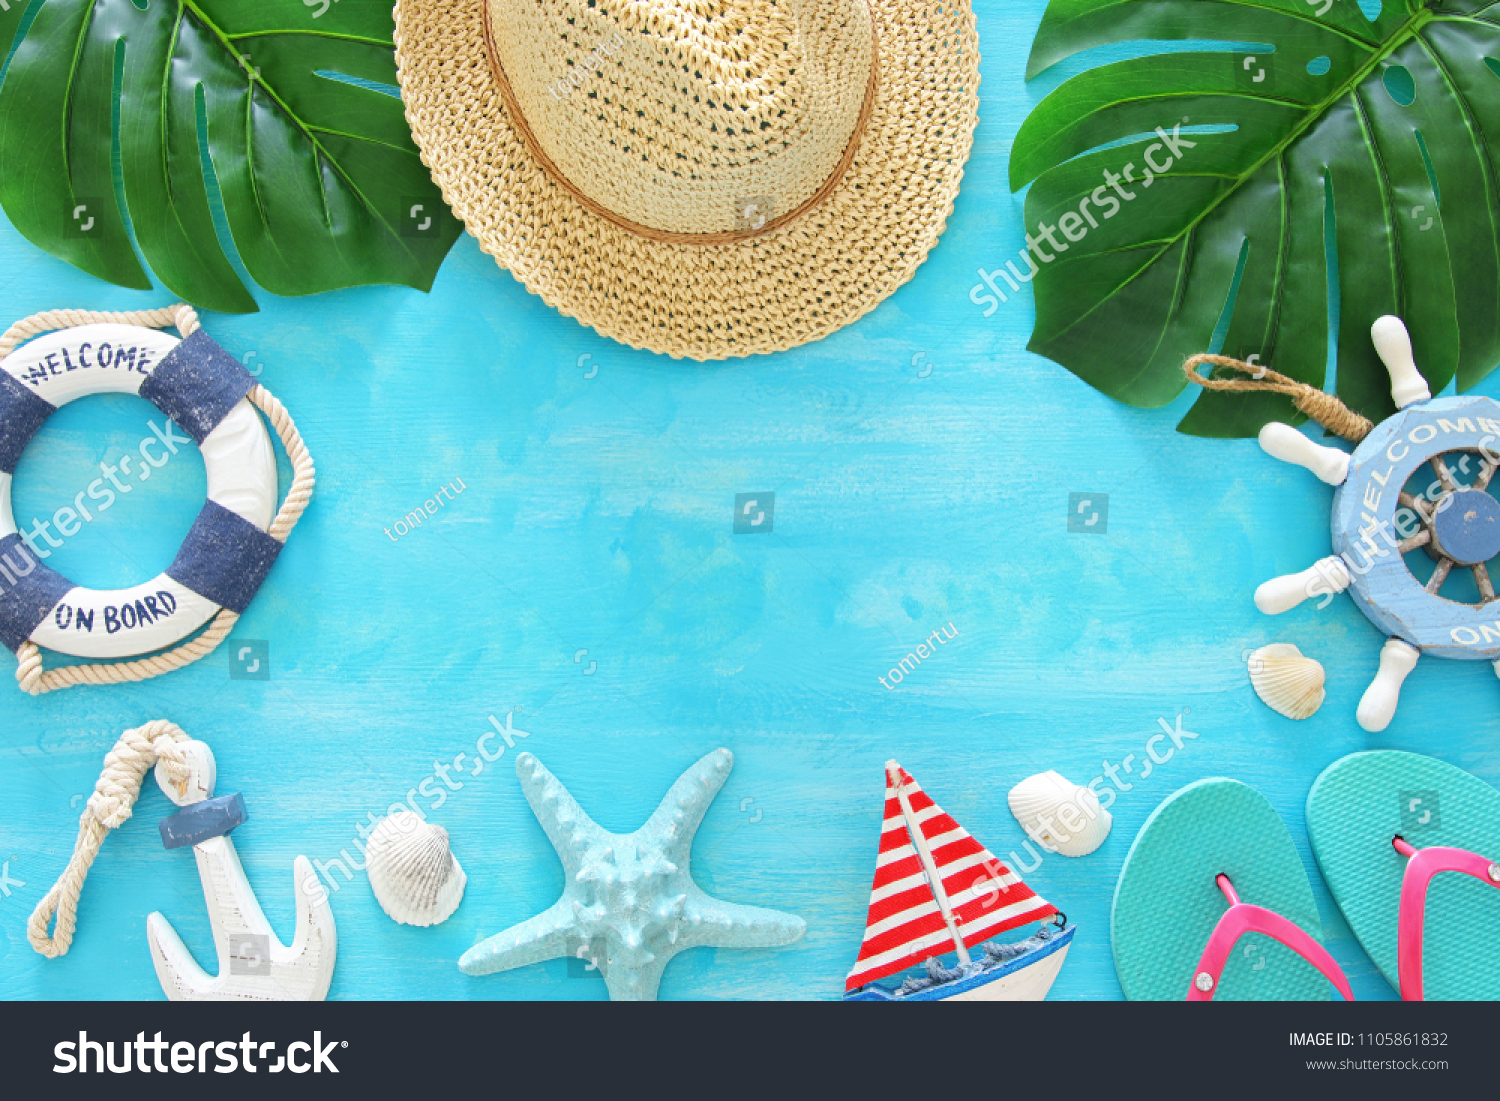 Tropical vacation and summer travel image with sea life style objects. Top view #1105861832